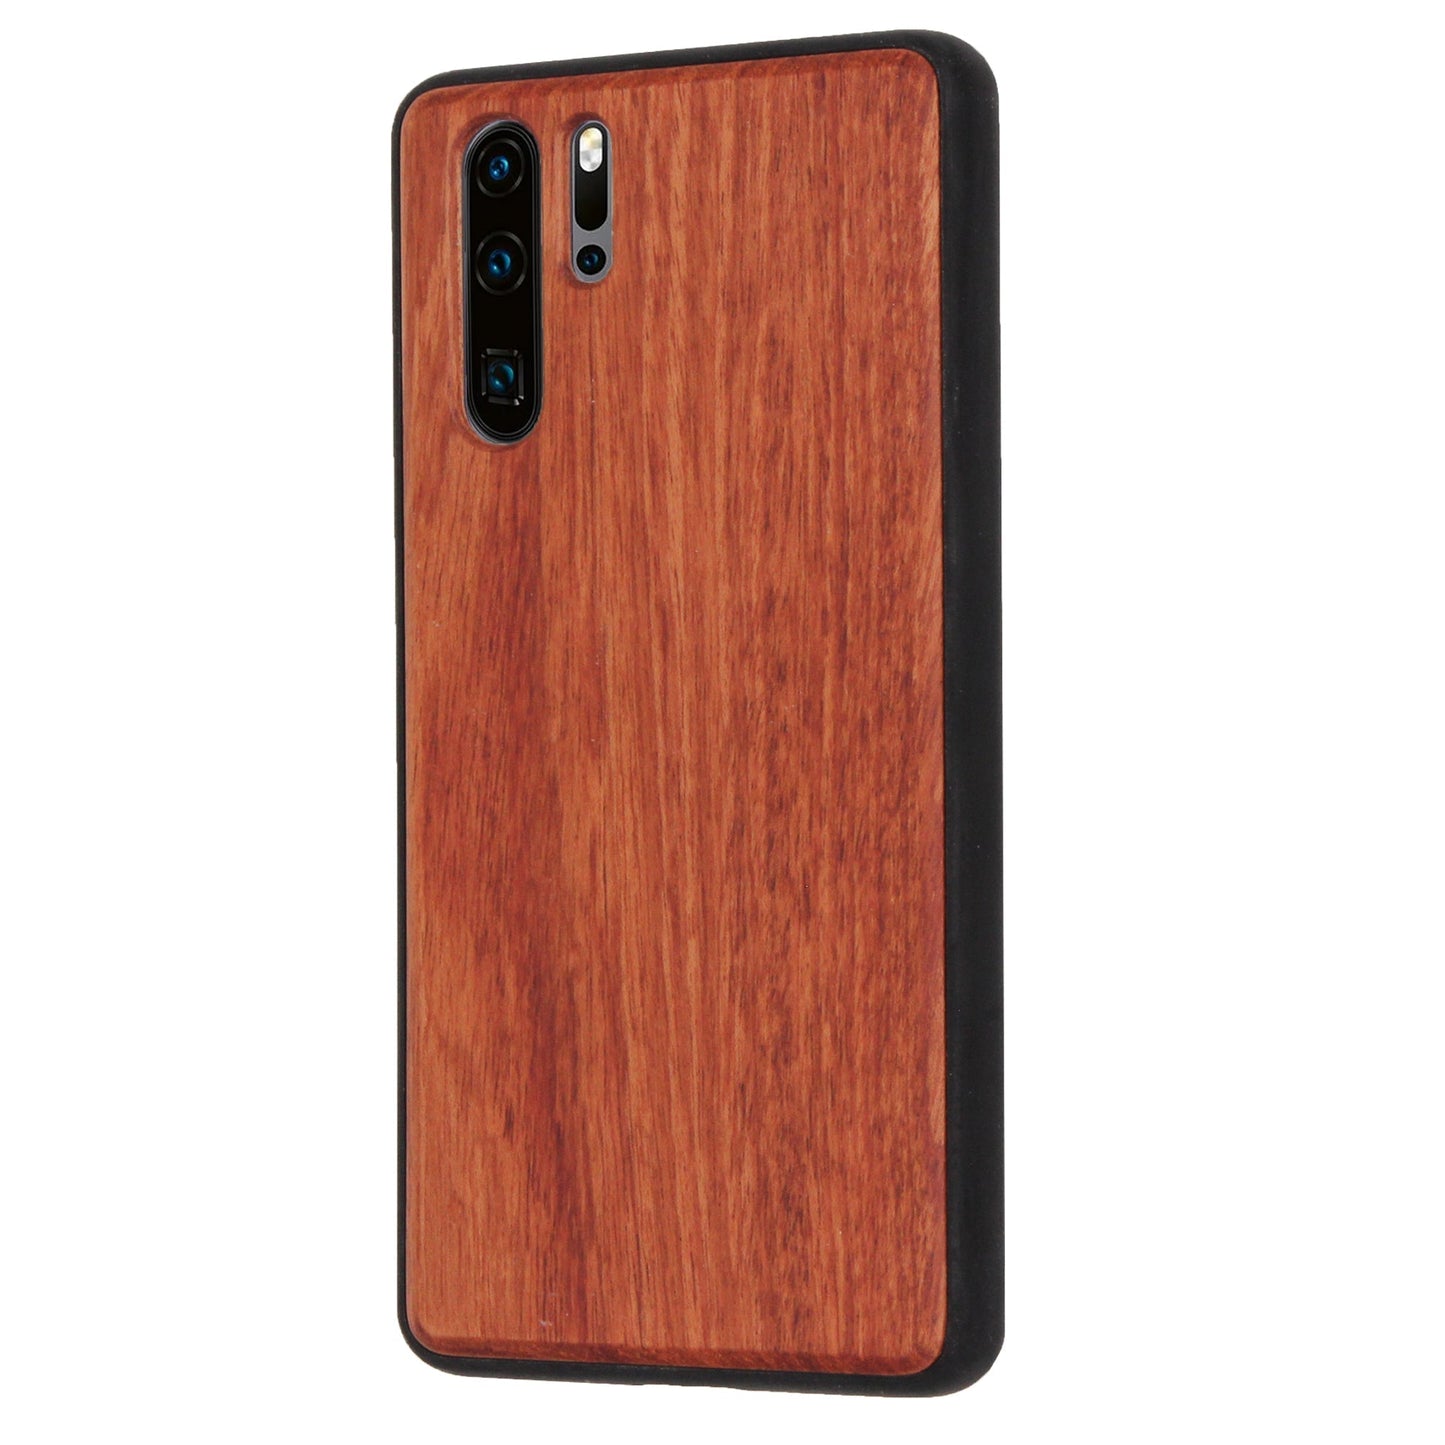 Rosewood Eden case for Huawei P30 Pro